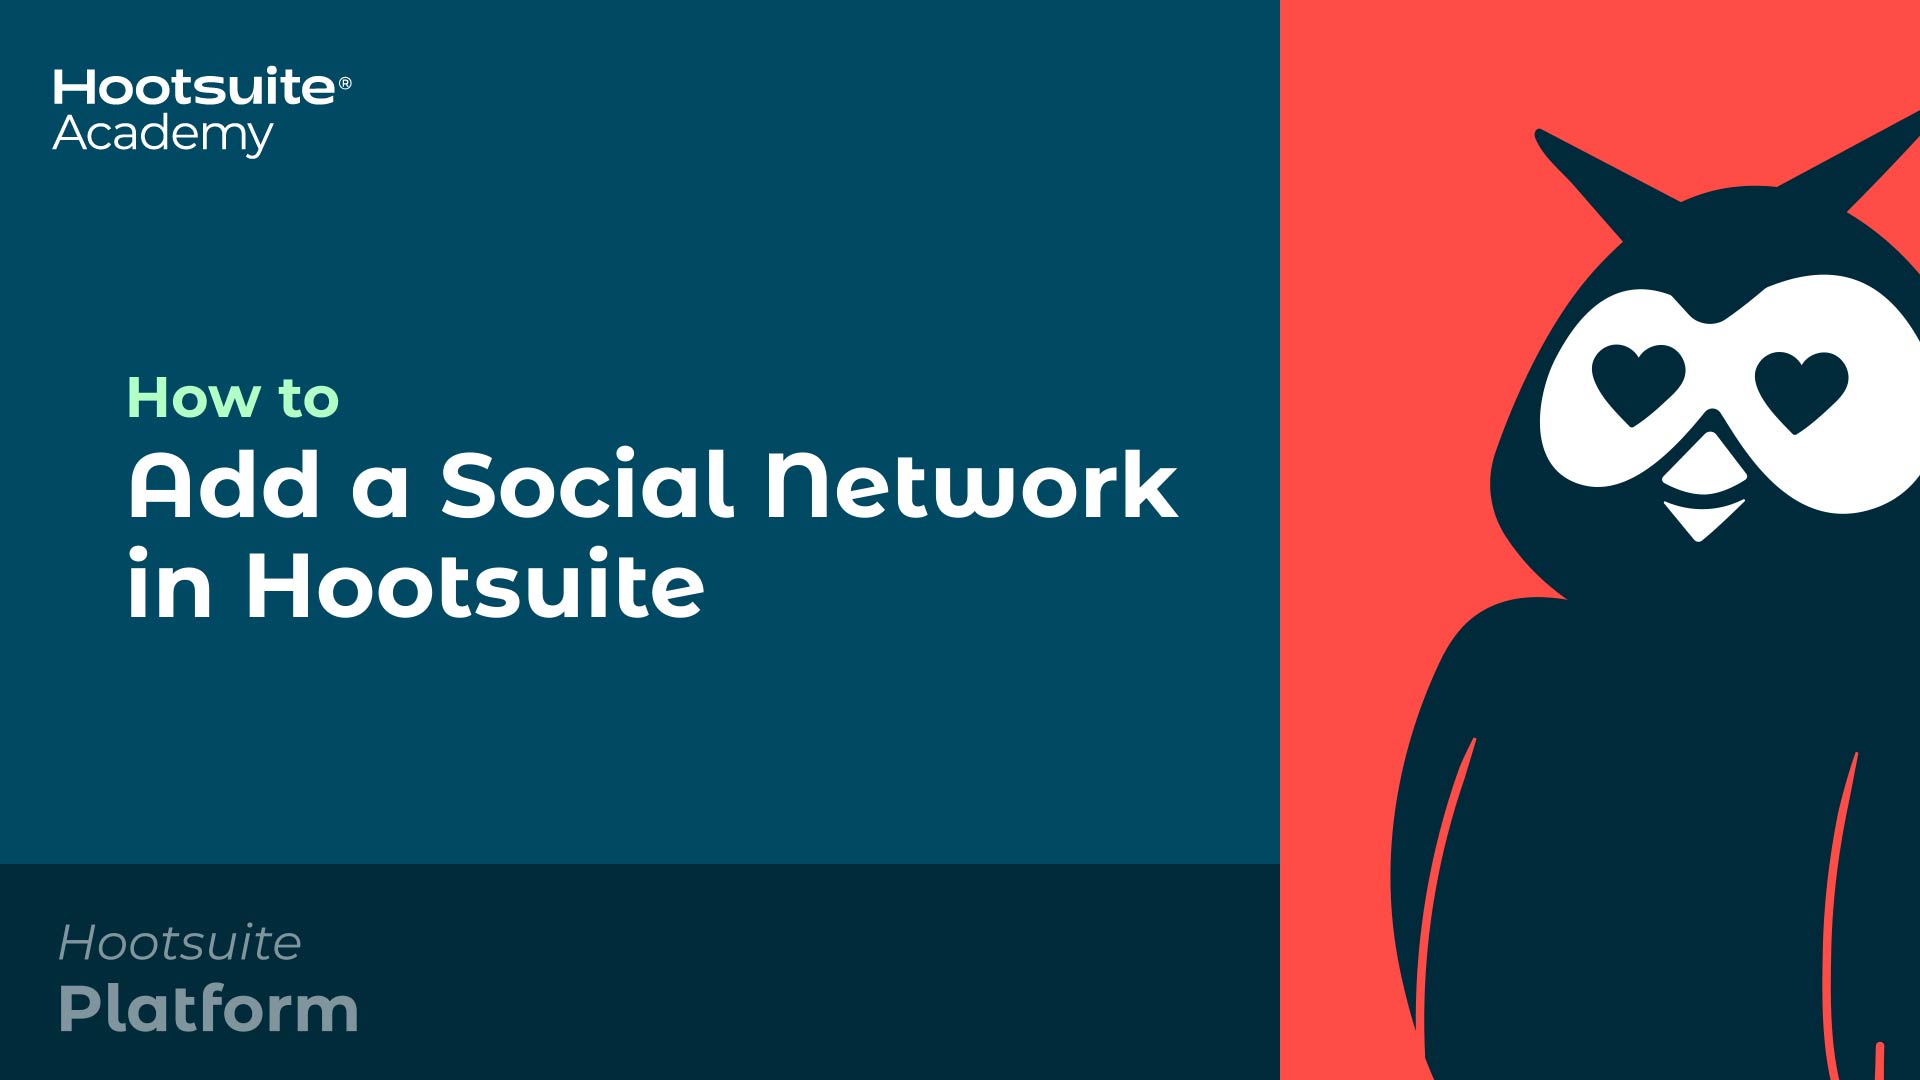 How to add a social network in Hootsuite video